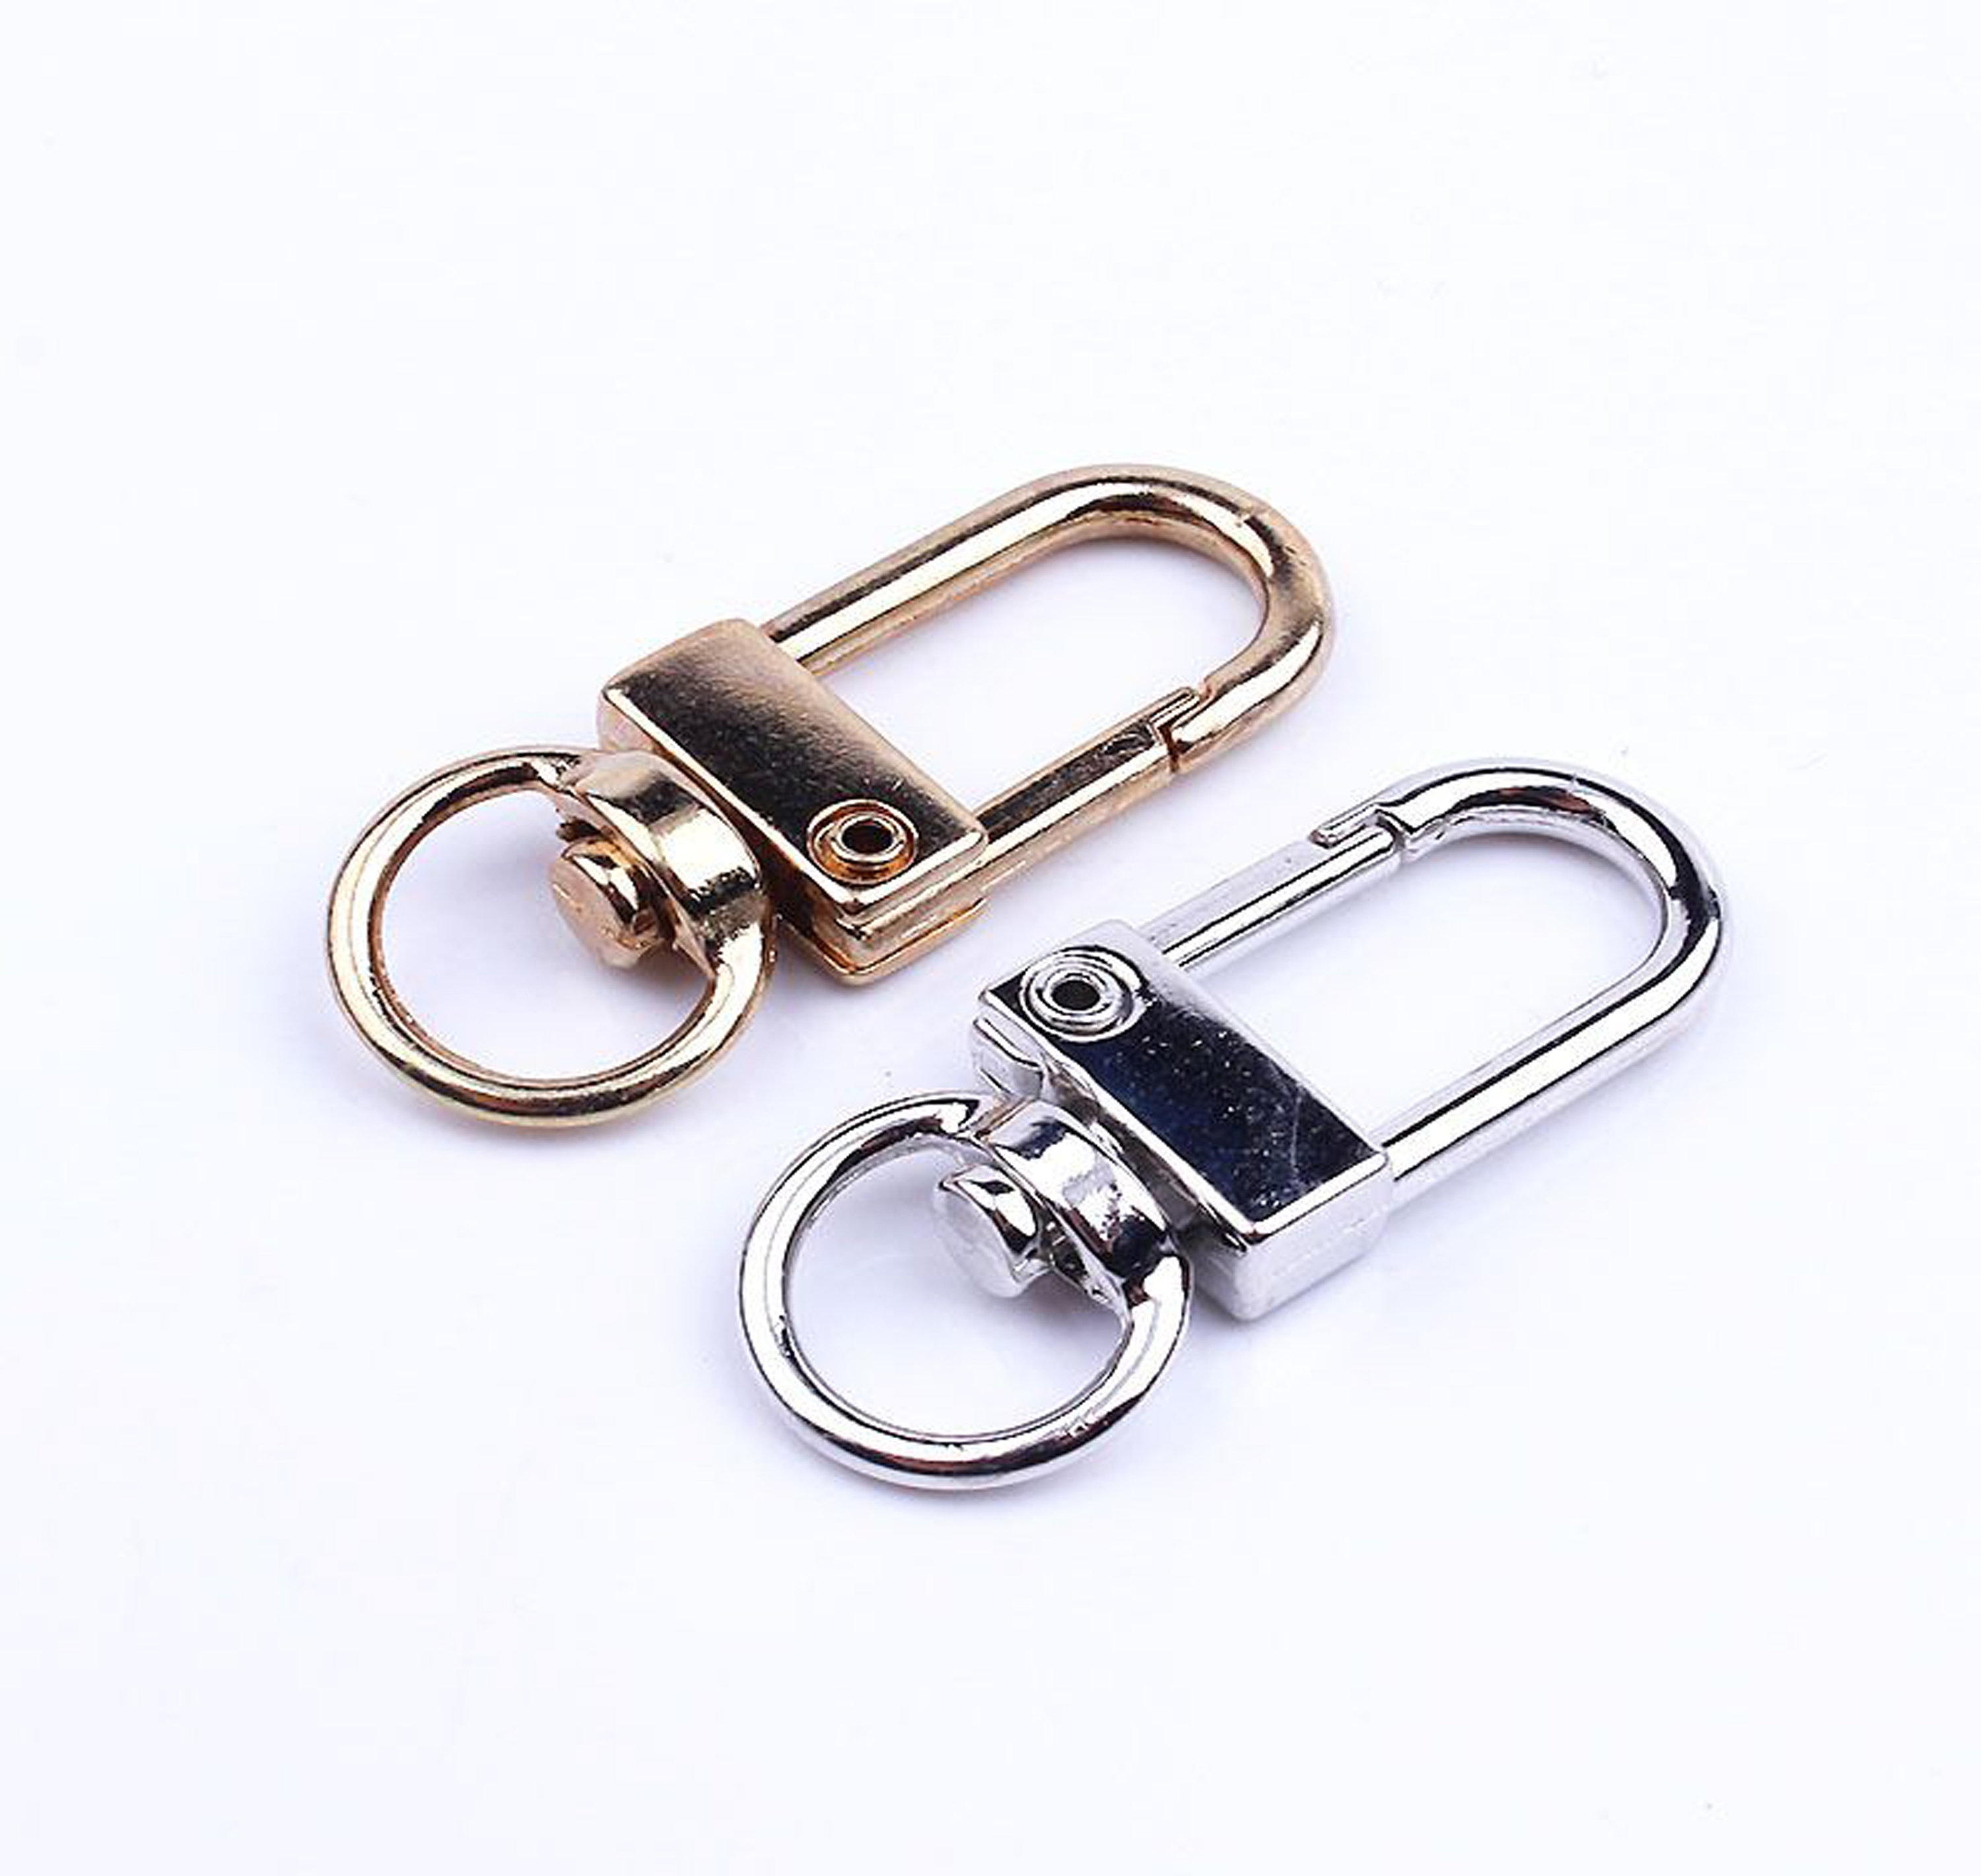 Gold And Silver Metal Keychain Rings With 30mm Long 70 Lobster Clasp Hook  For Jewelry Making From Danteexum, $20.79